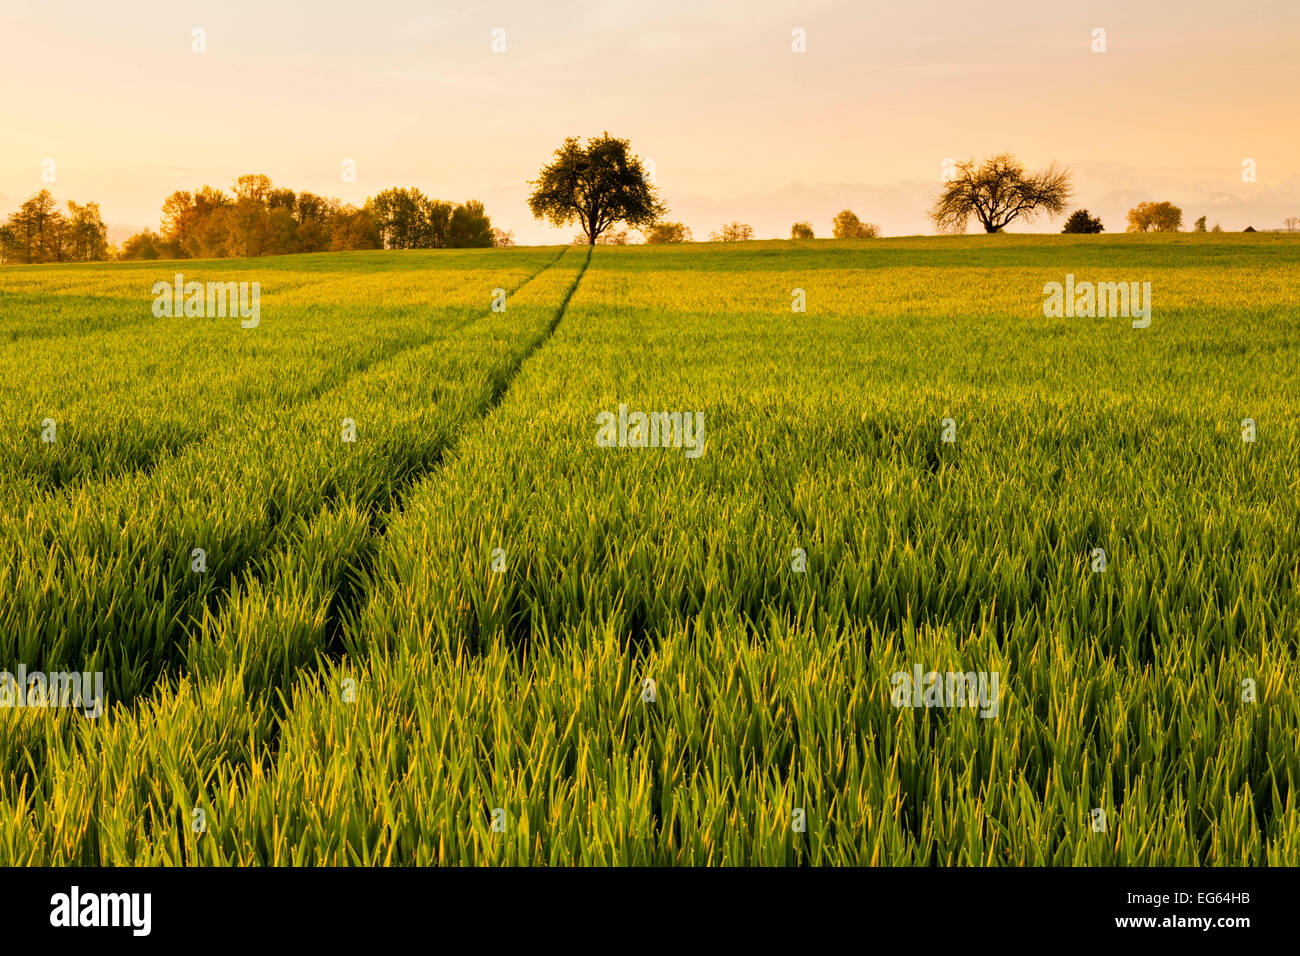 Early morning at a Corn Field near the Greifensee, Kanton Zurich Stock Photo